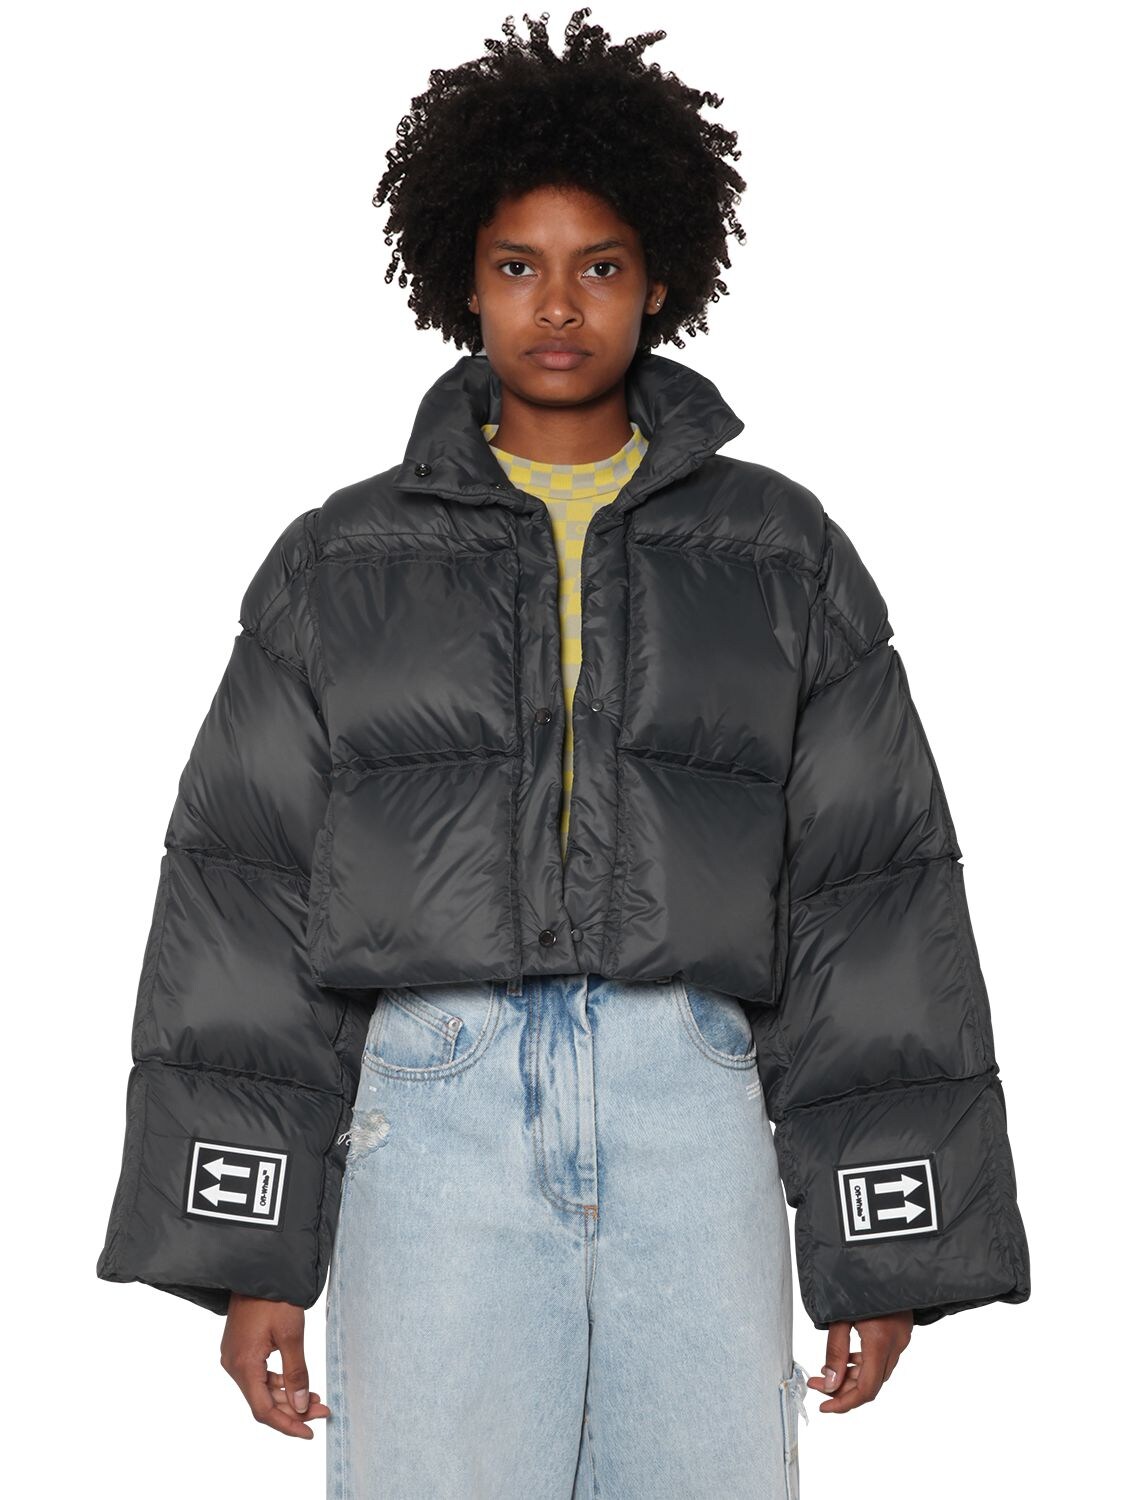 OFF-WHITE CROPPED DOWN JACKET,70I4T8030-MDKWMA2